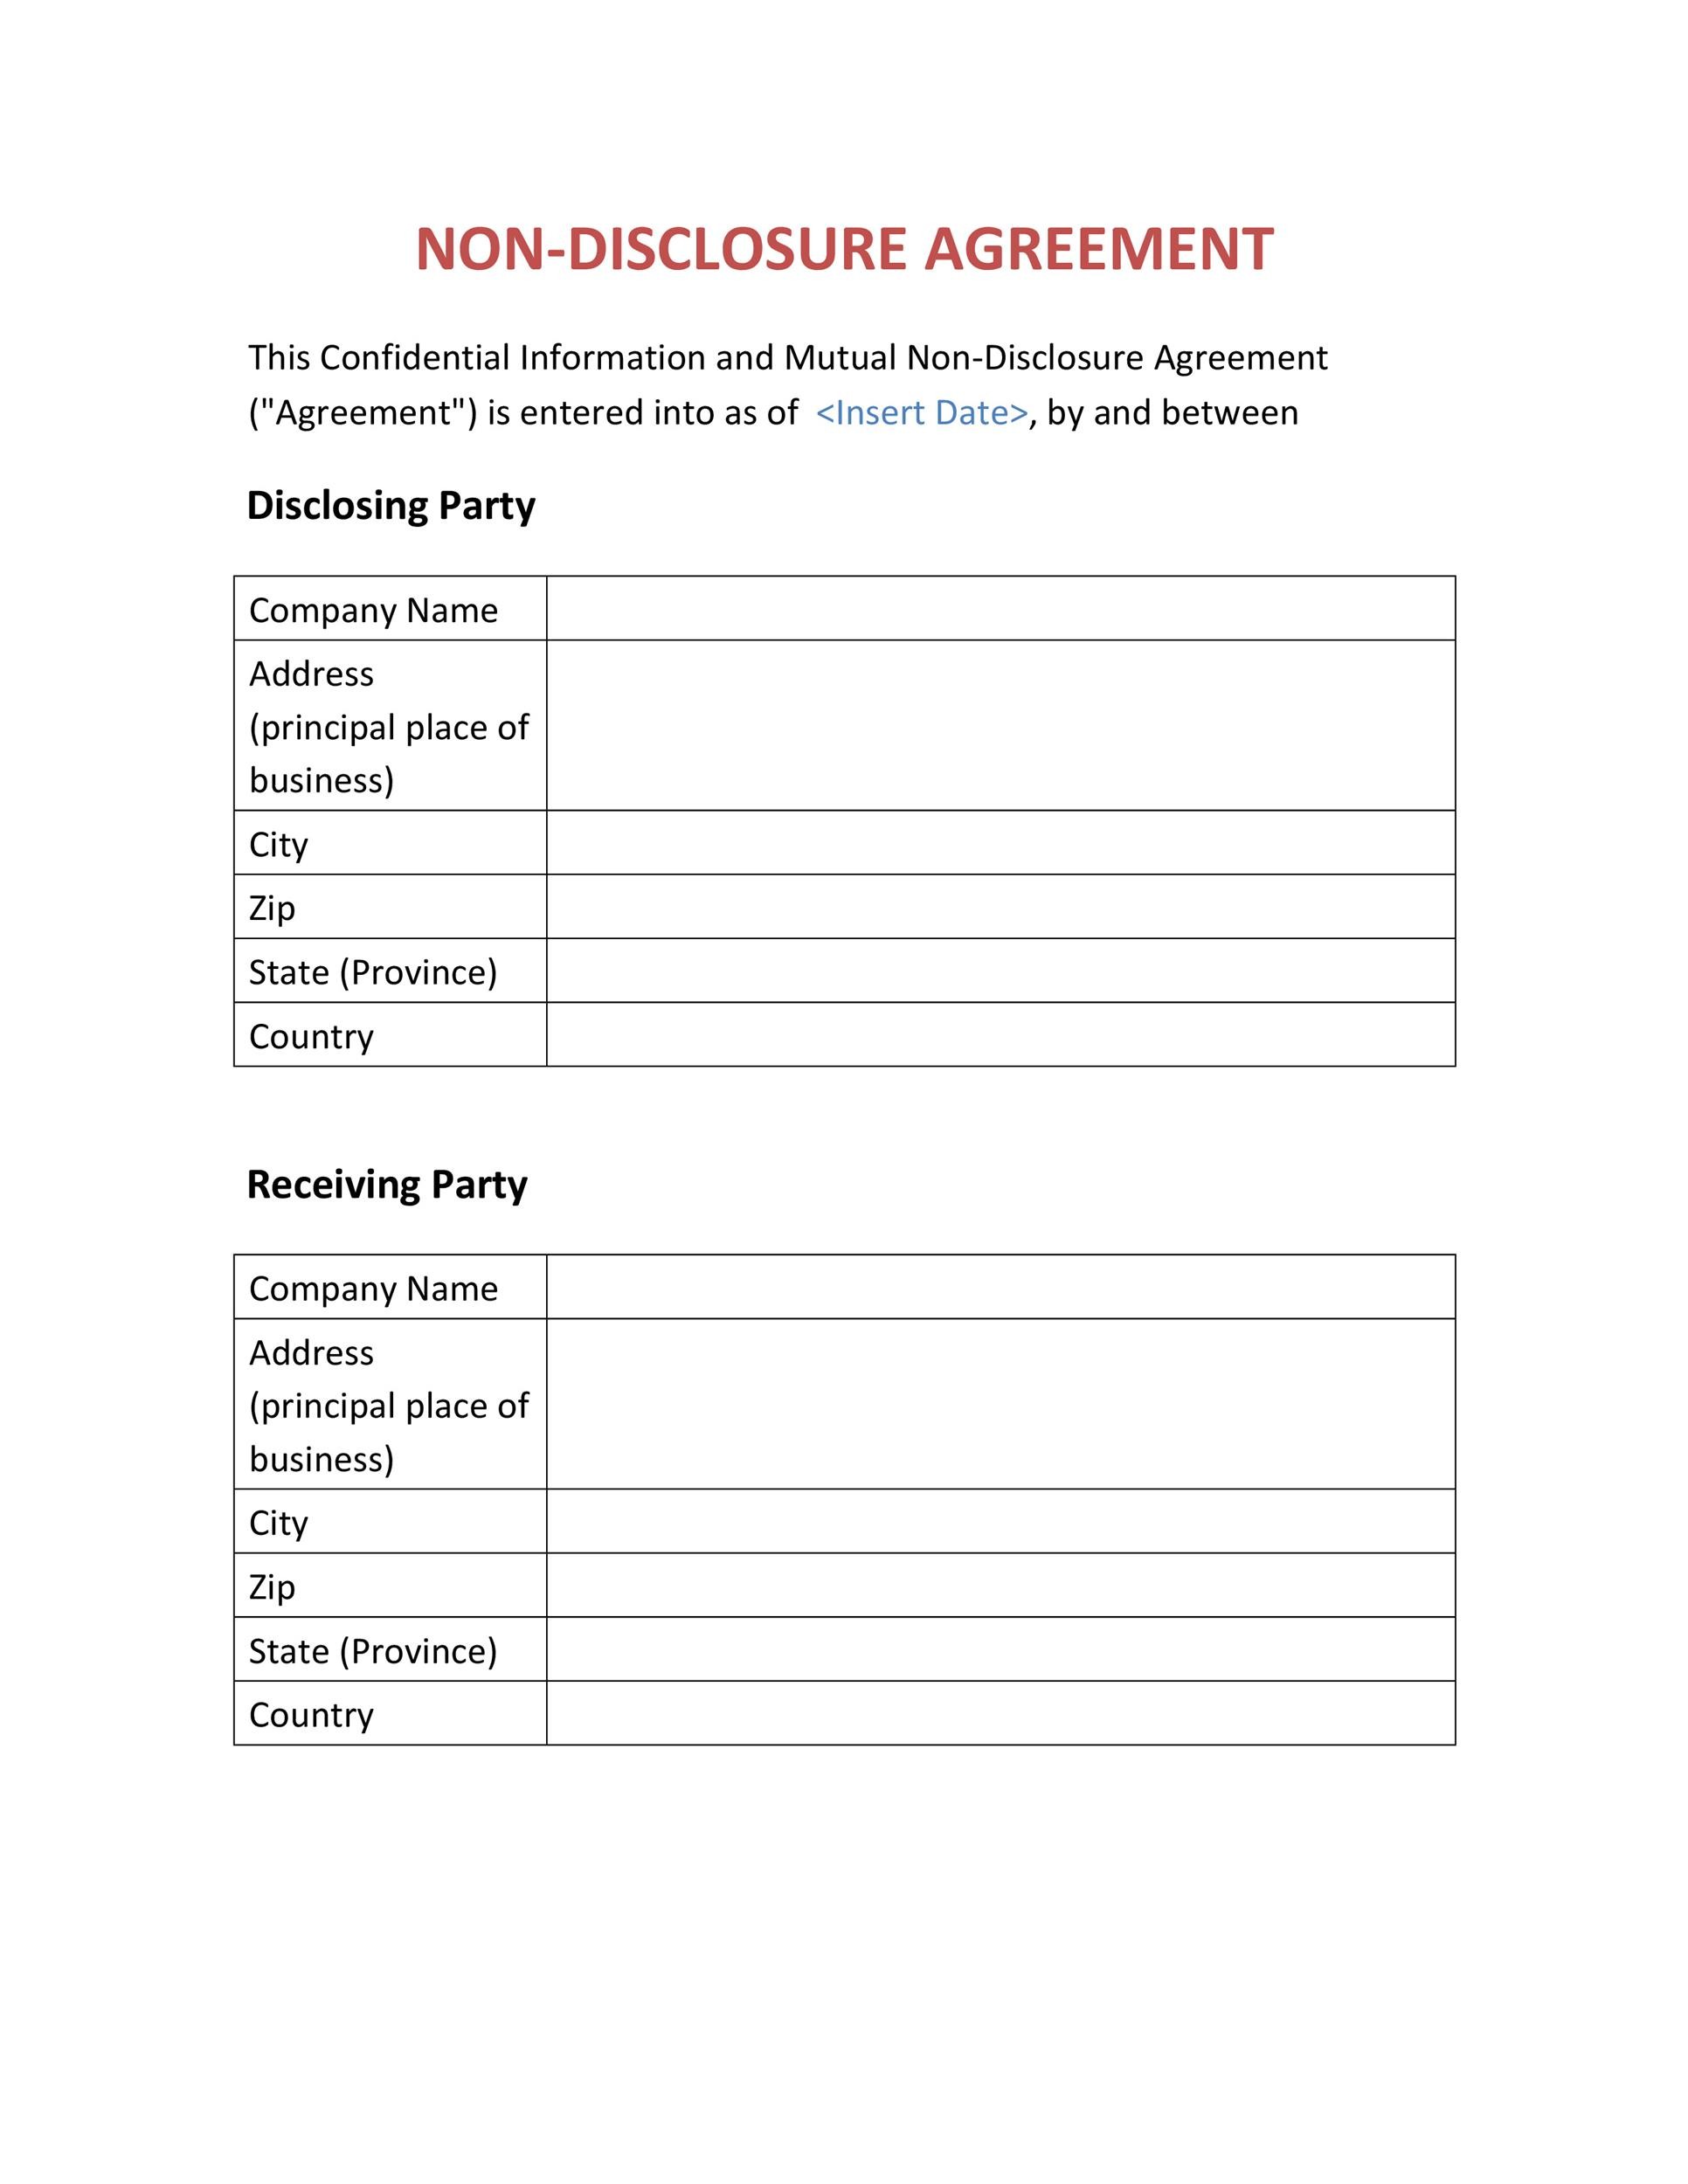 40 Non Disclosure Agreement Templates Samples Forms ᐅ TemplateLab